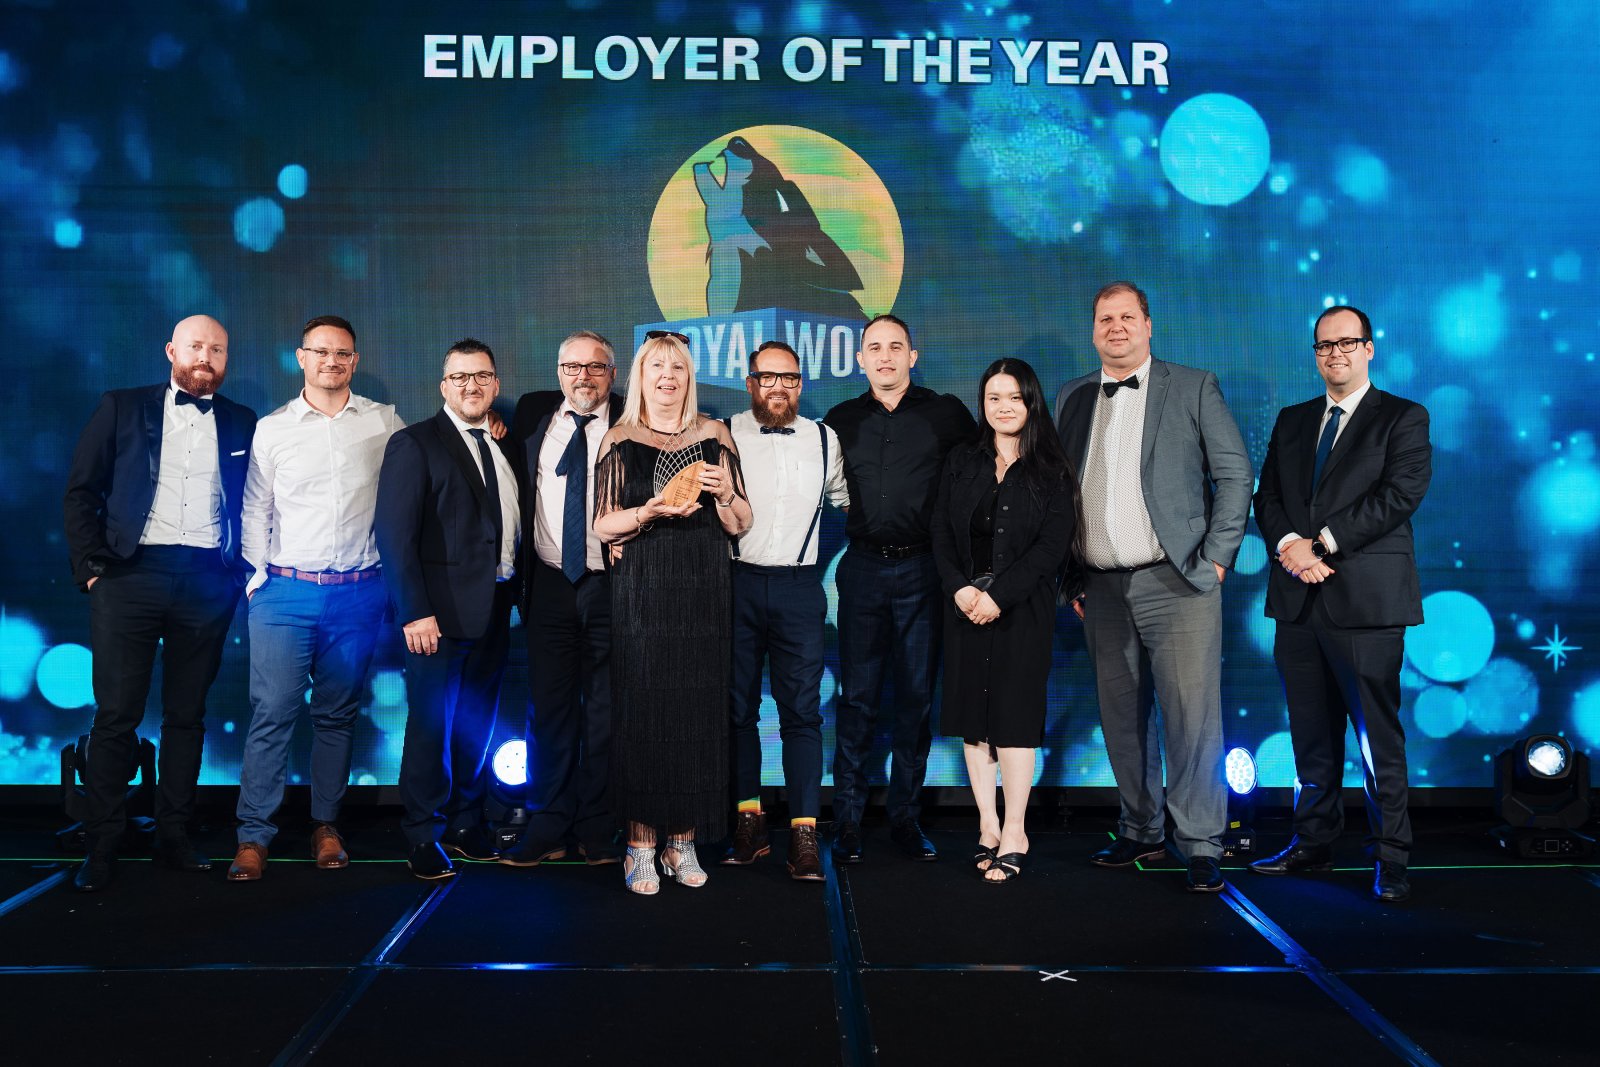 Royal Wolf wins "Employer of the Year" at the 2degrees Auckland Business Awards.